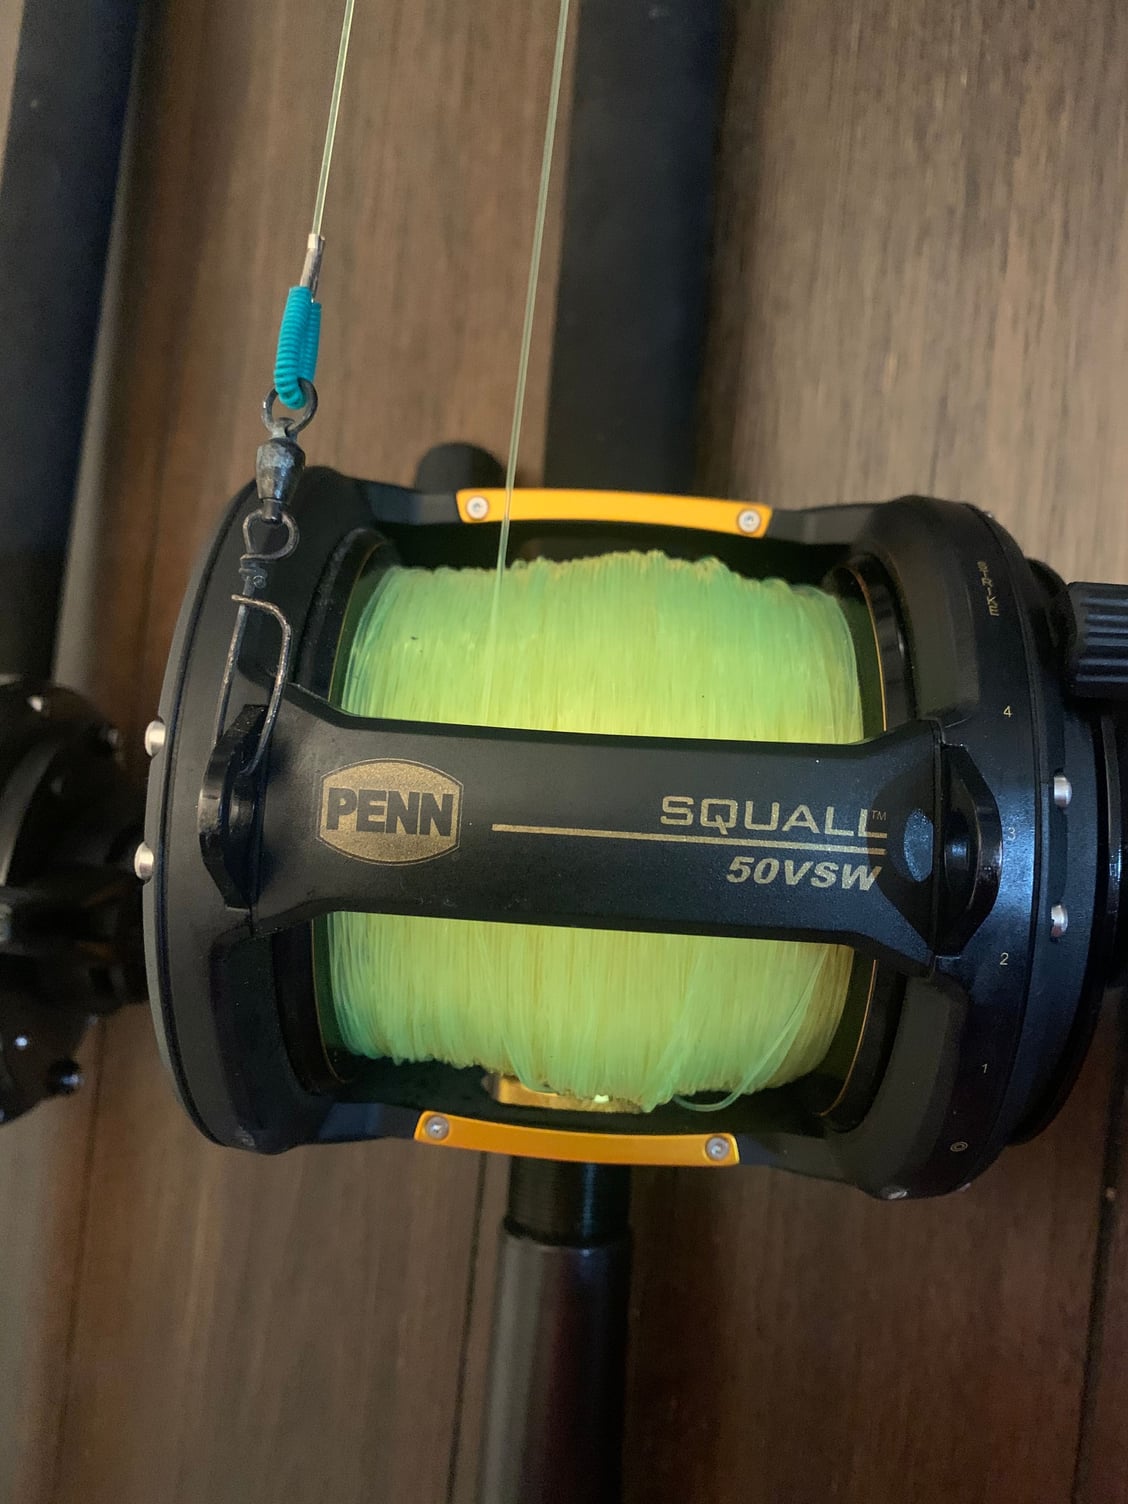 For Sale: Two Penn Squall 50vsw 2 speeds with 5'6” Penn Ally Rods - The  Hull Truth - Boating and Fishing Forum